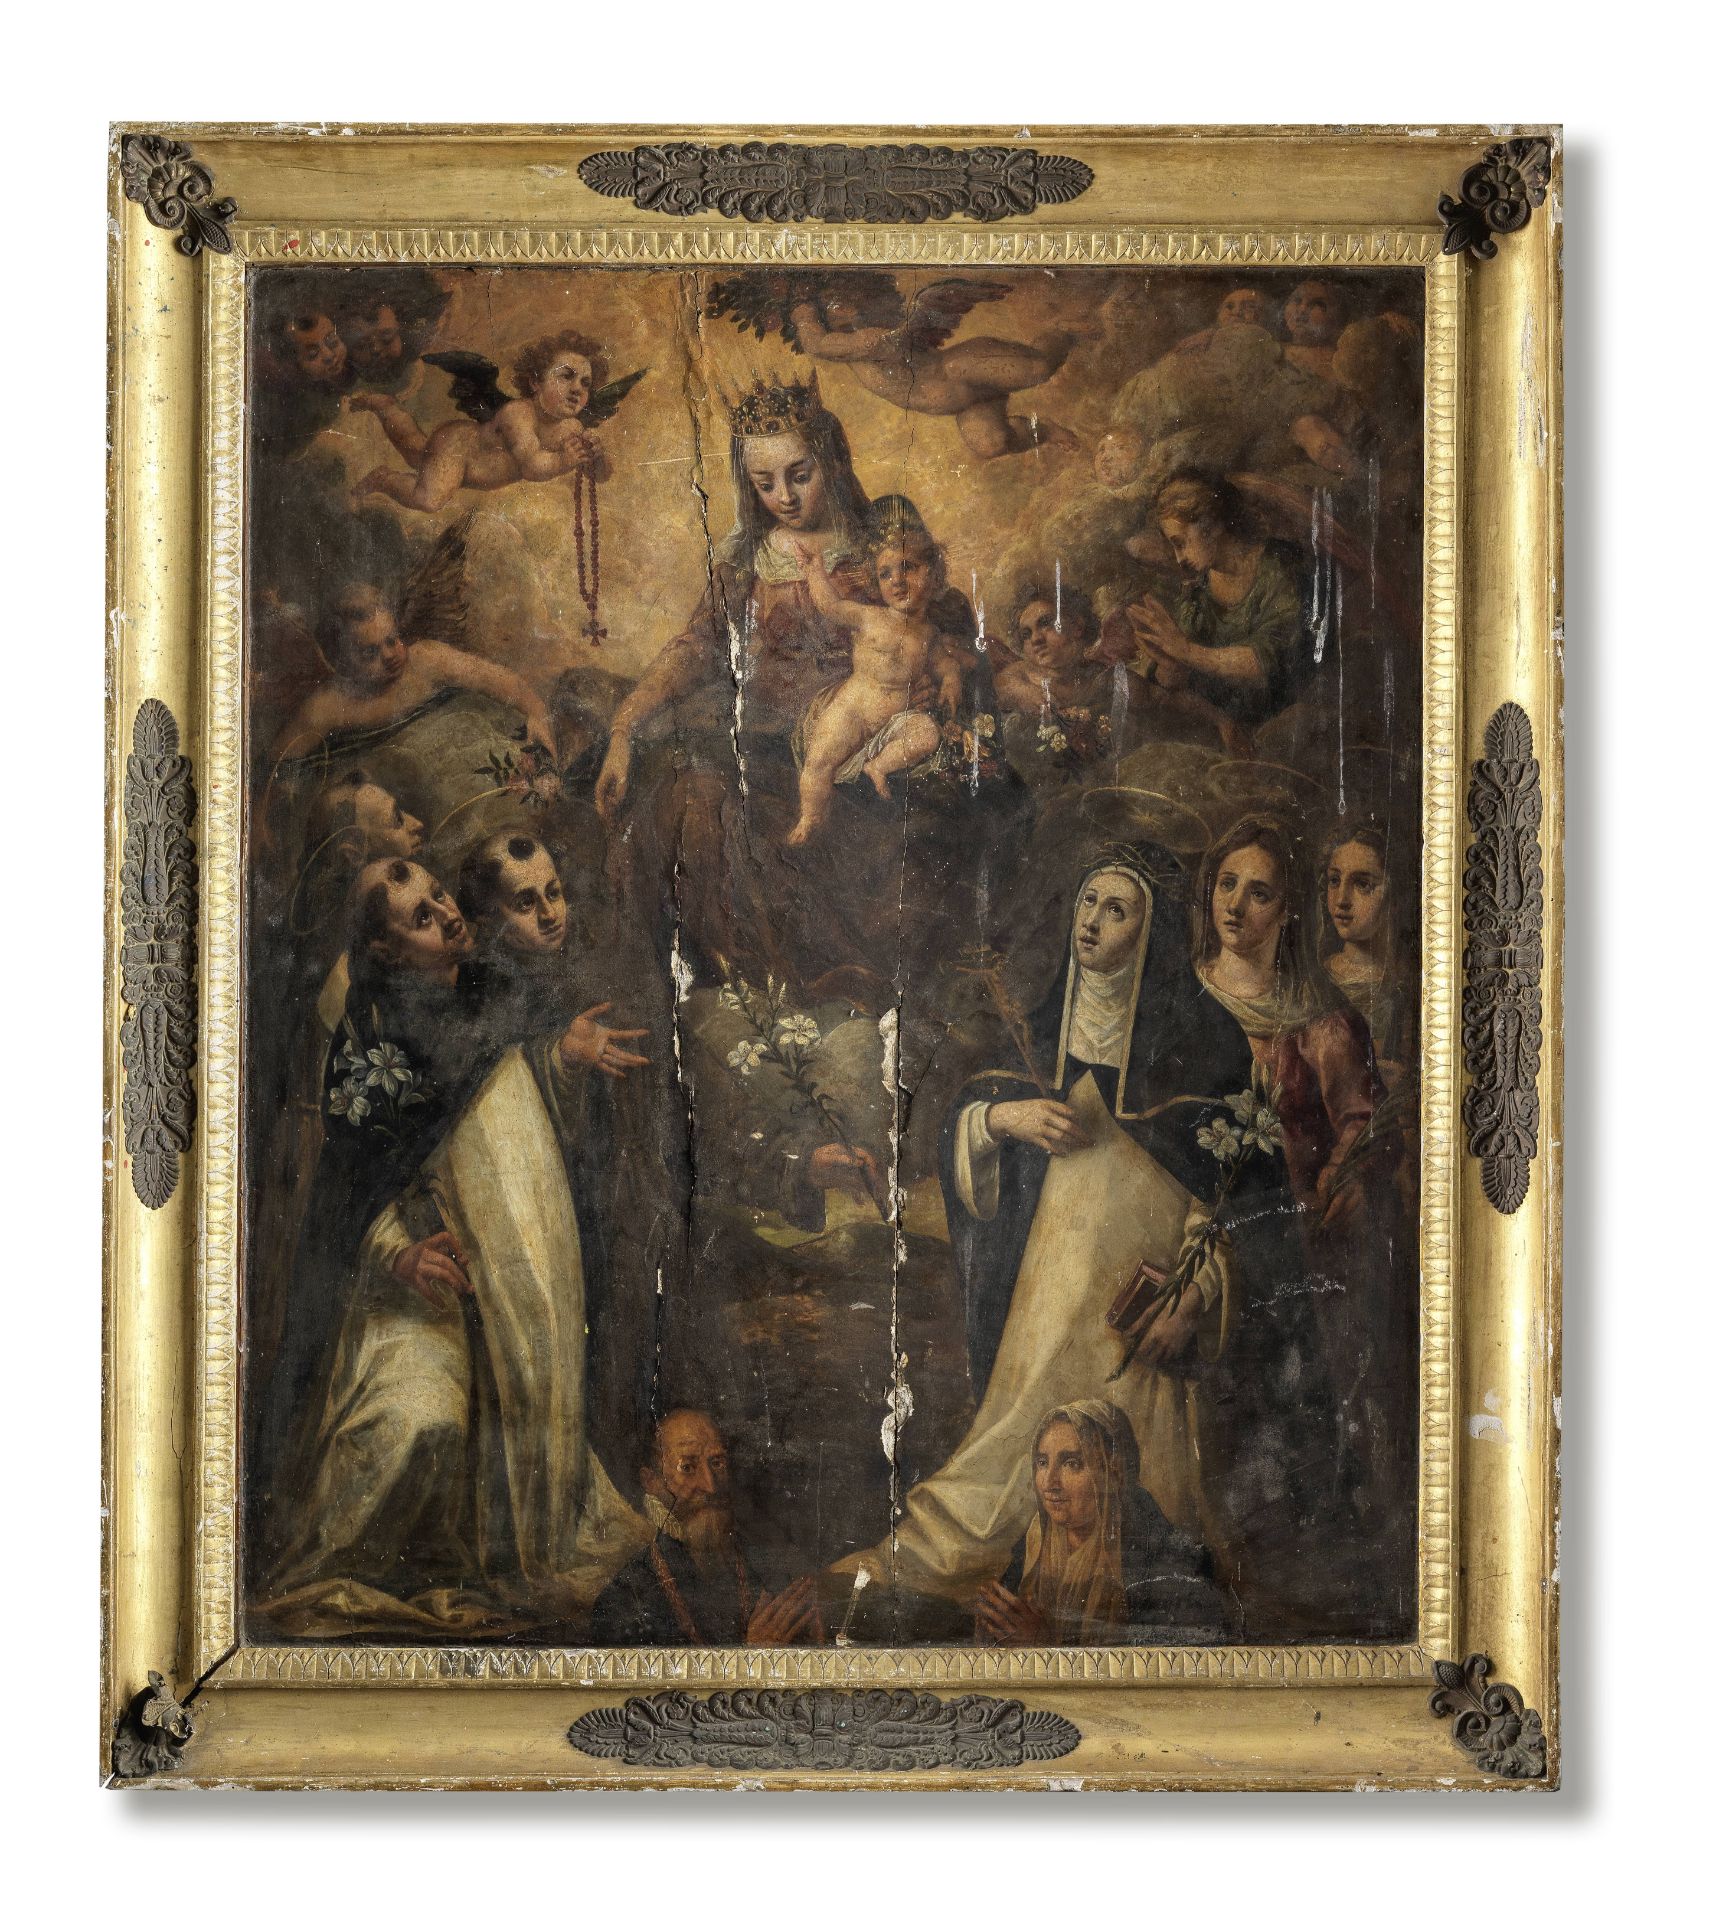 Spanish School, 16th Century The Madonna and Child surrounded by Saints with two donors